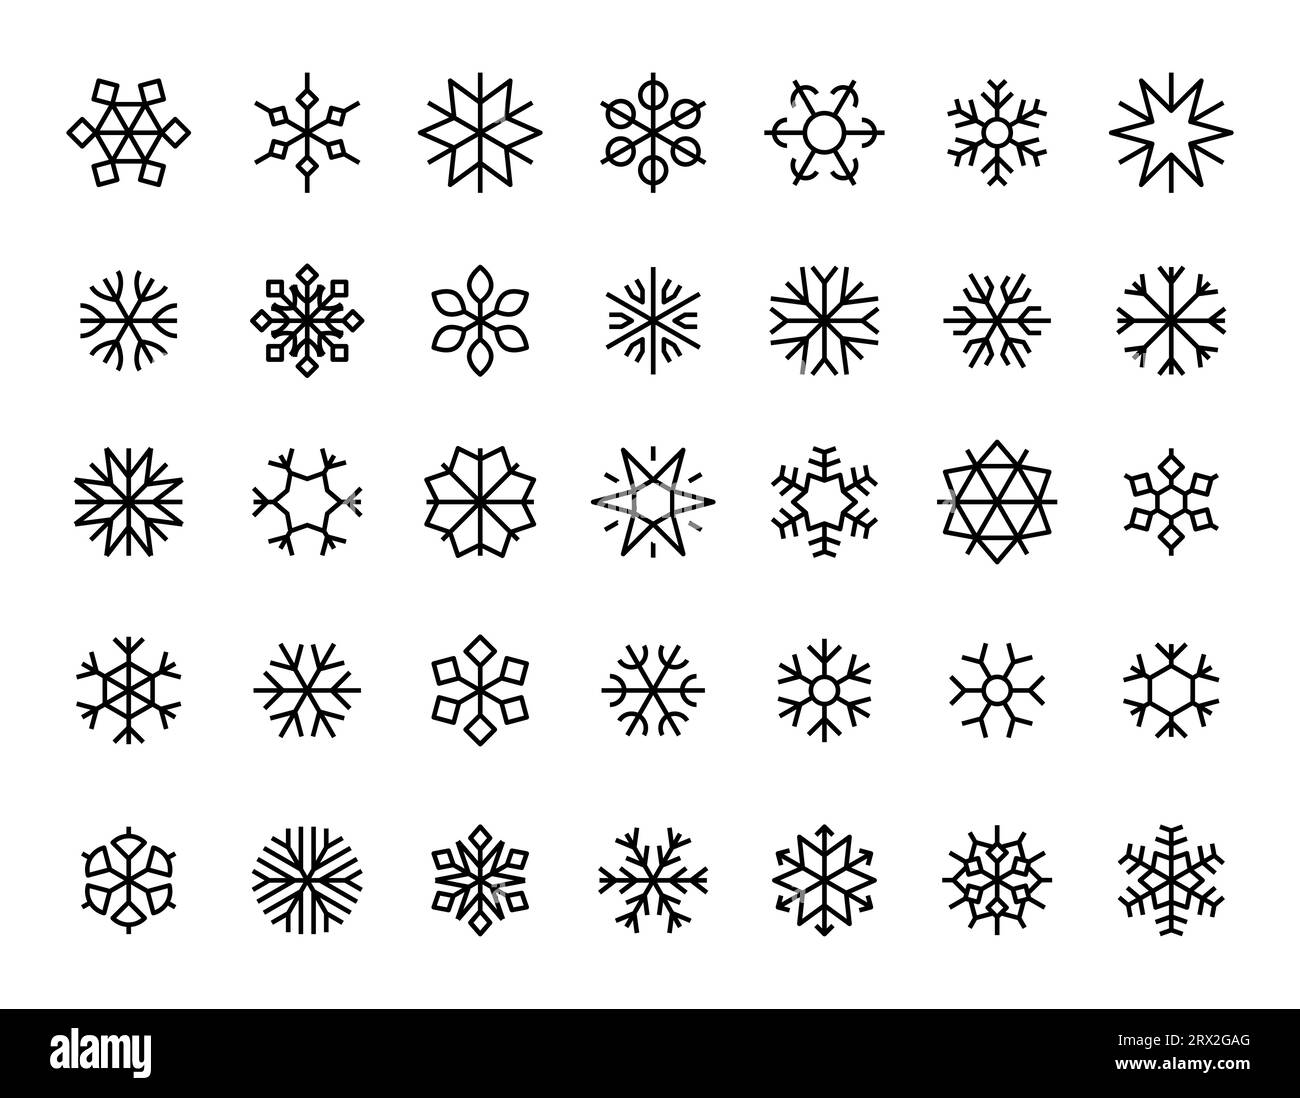 Geometric Snowflakes set to be issued Oct. 23 at ASDA New York show